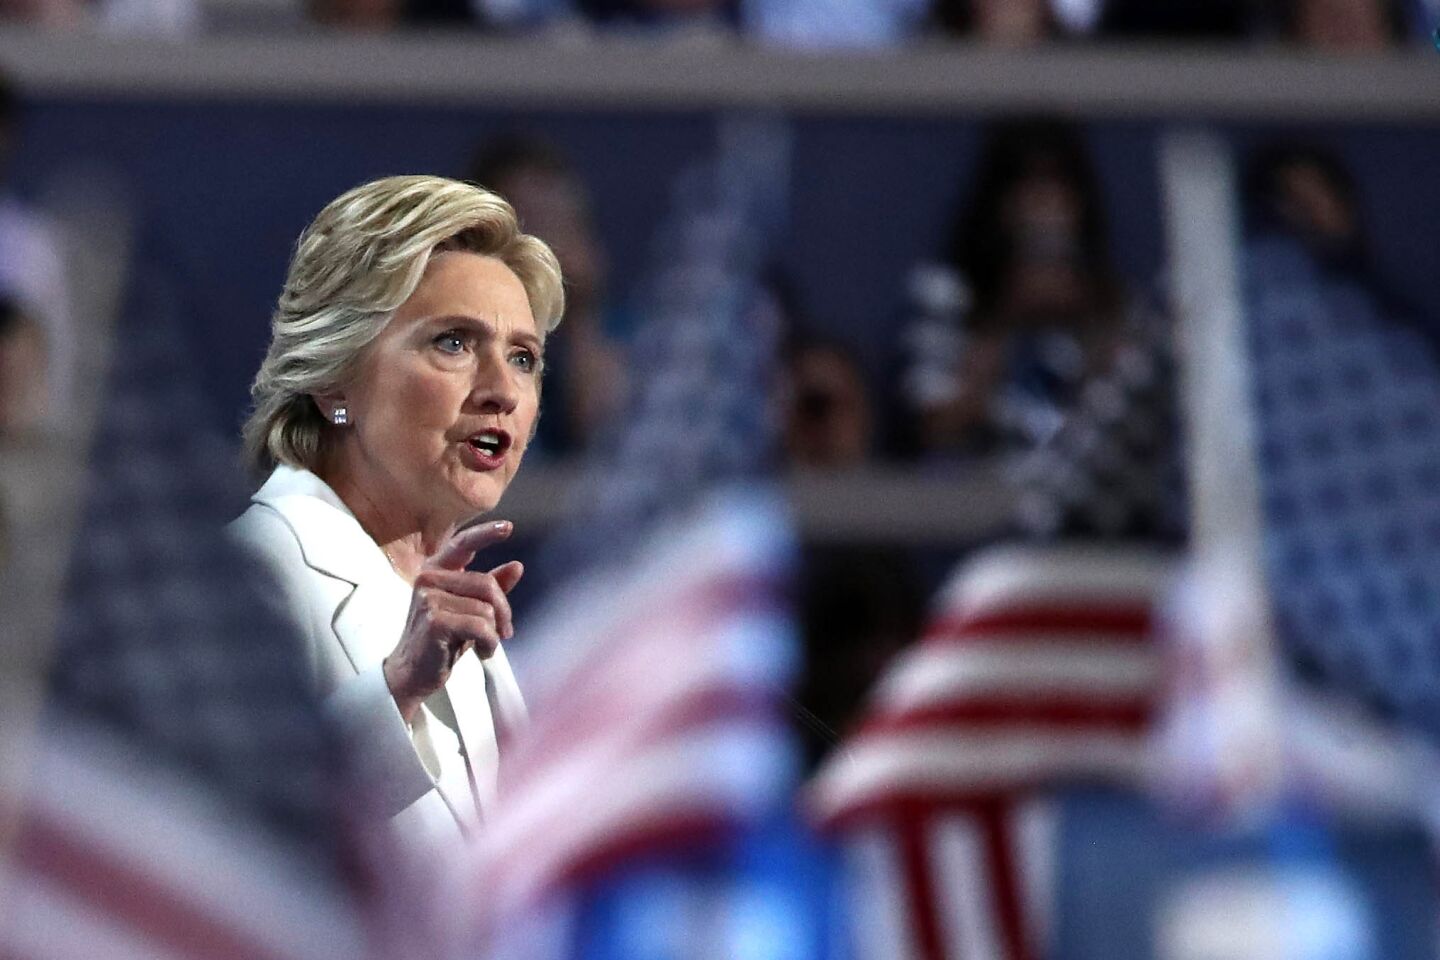 Democratic presidential candidate Hillary Clinton delivers remarks during the fourth day of the Democratic National Convention.